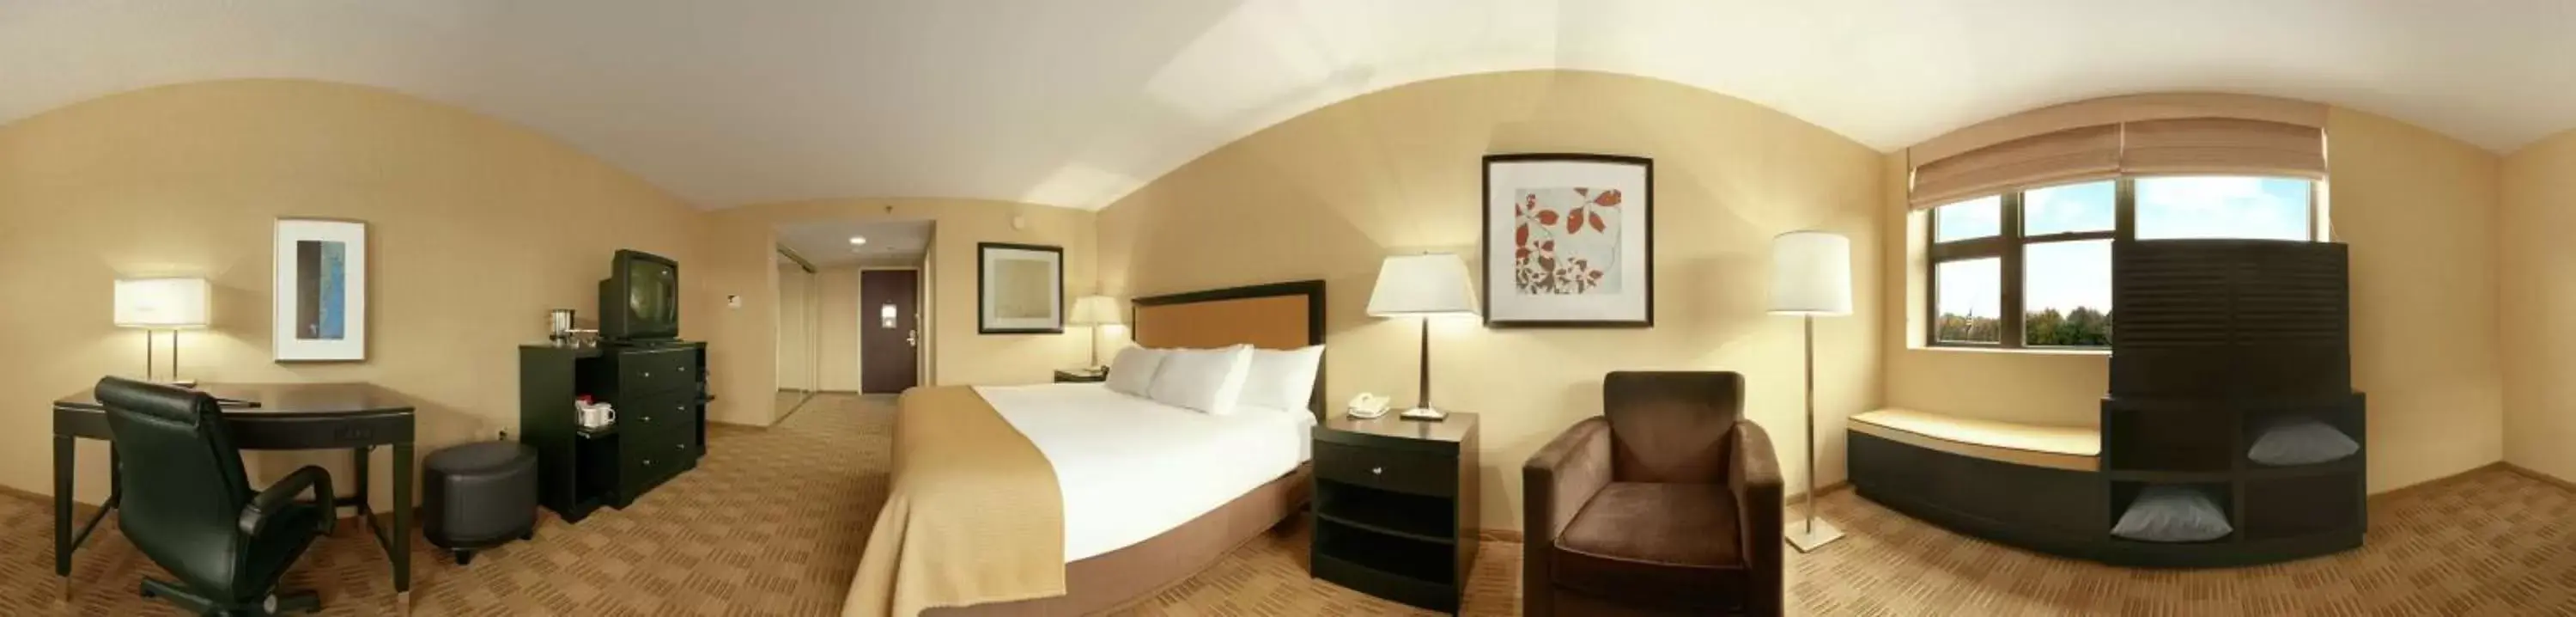 Bedroom, Restaurant/Places to Eat in The Saratoga Hilton